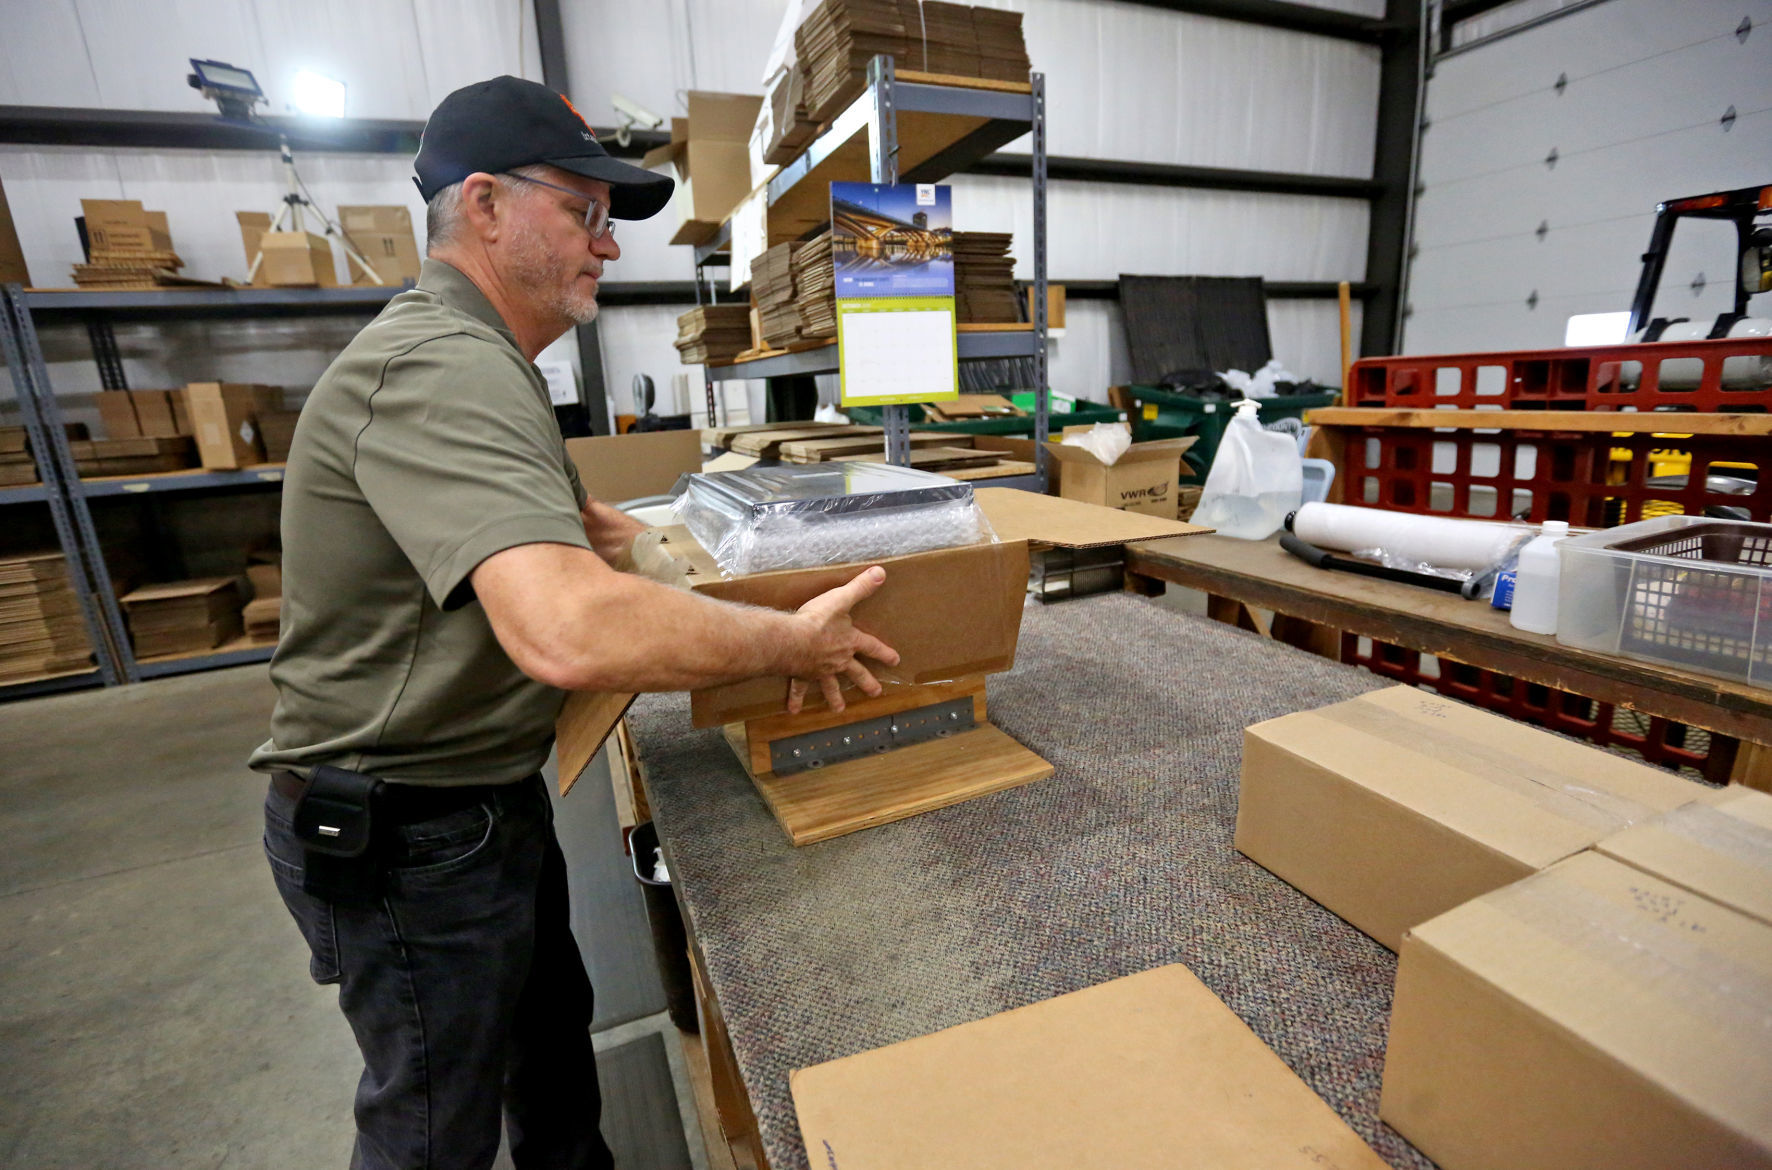 Dan Ehlinger packages orders at IBI Scientific in Dubuque on Friday, Oct. 11, 2019. PHOTO CREDIT: JESSICA REILLY